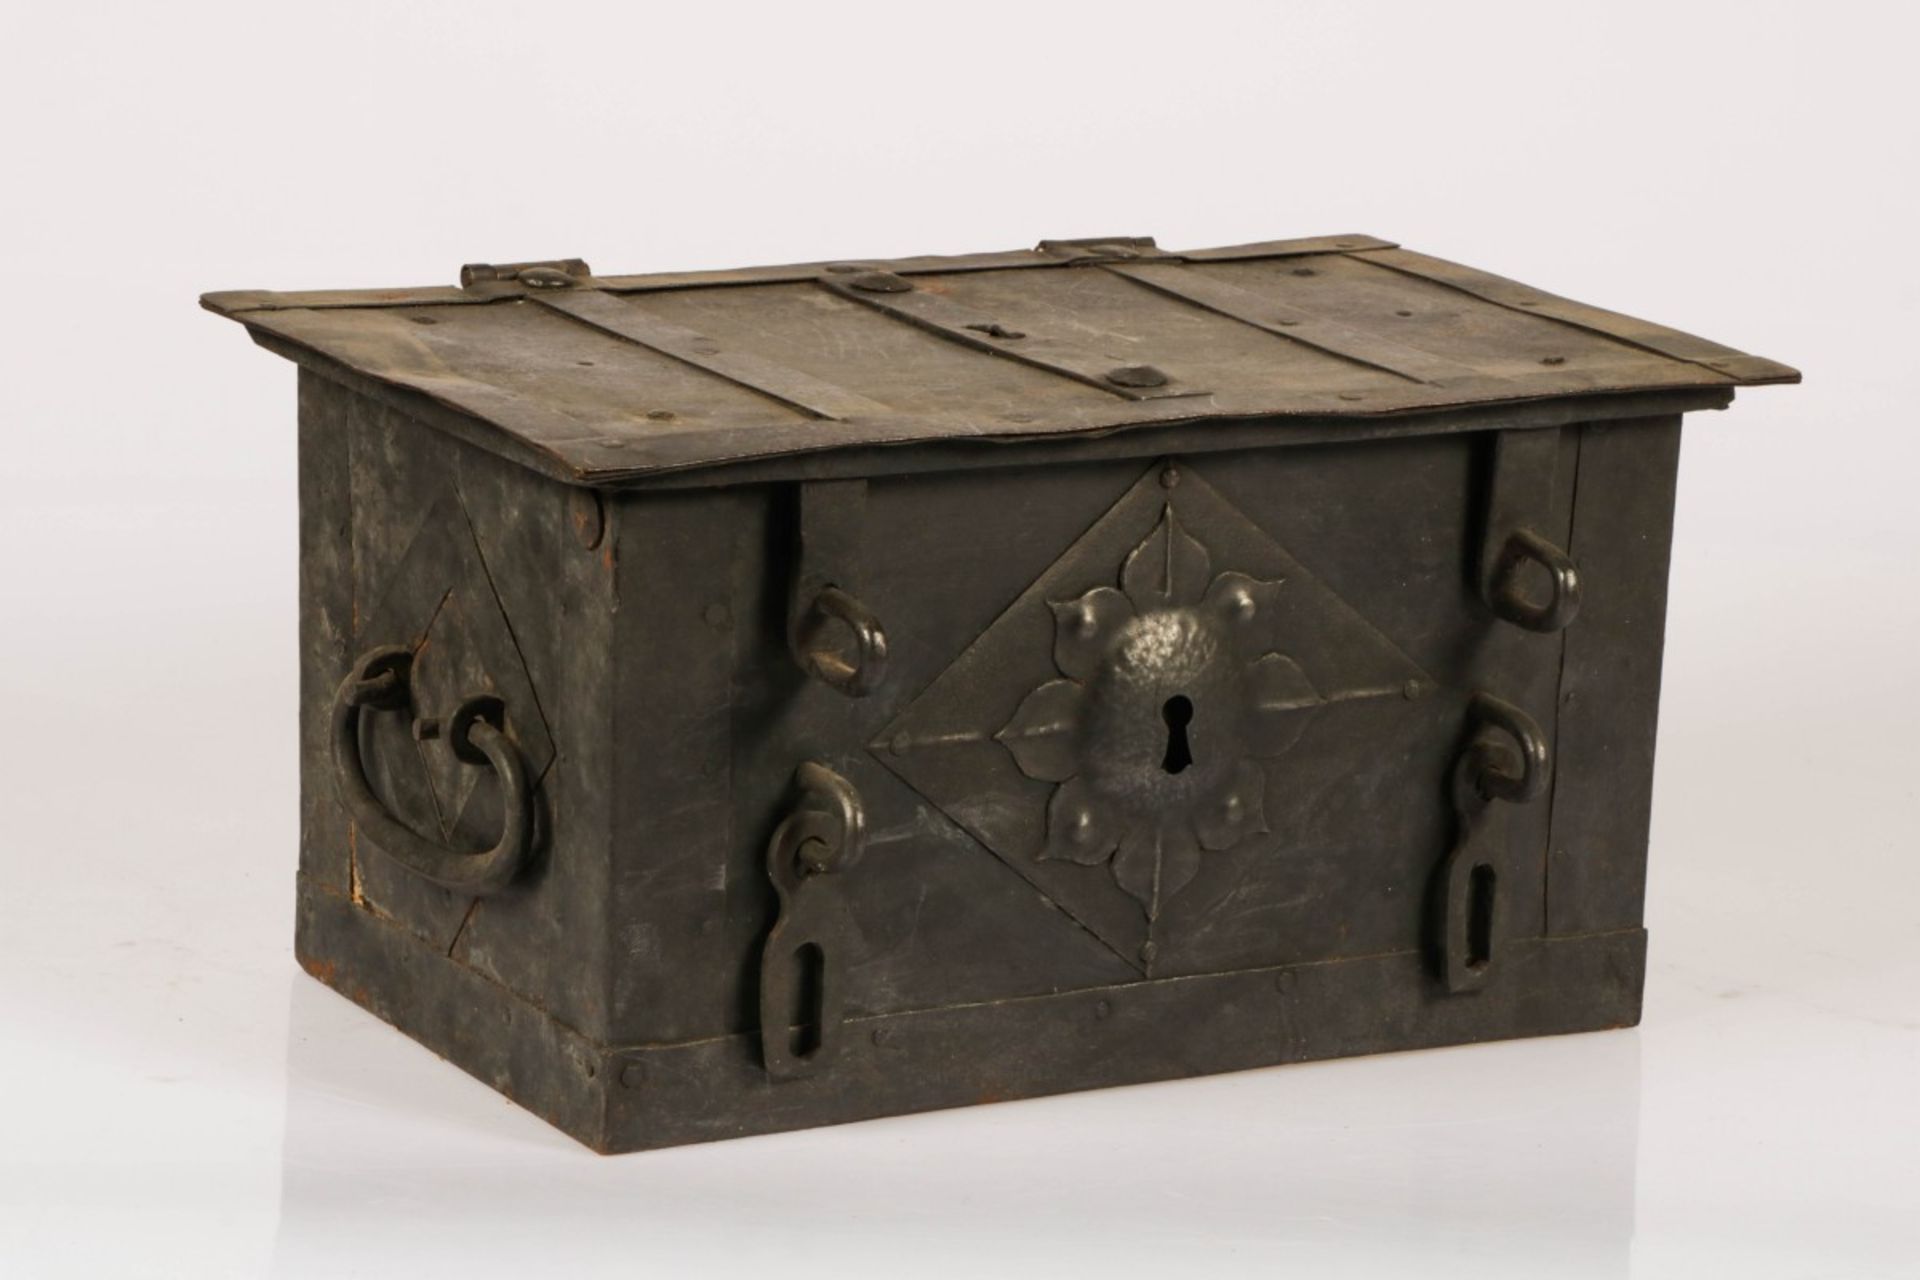 A wrought iron strongbox with iron mounts and lockplate.